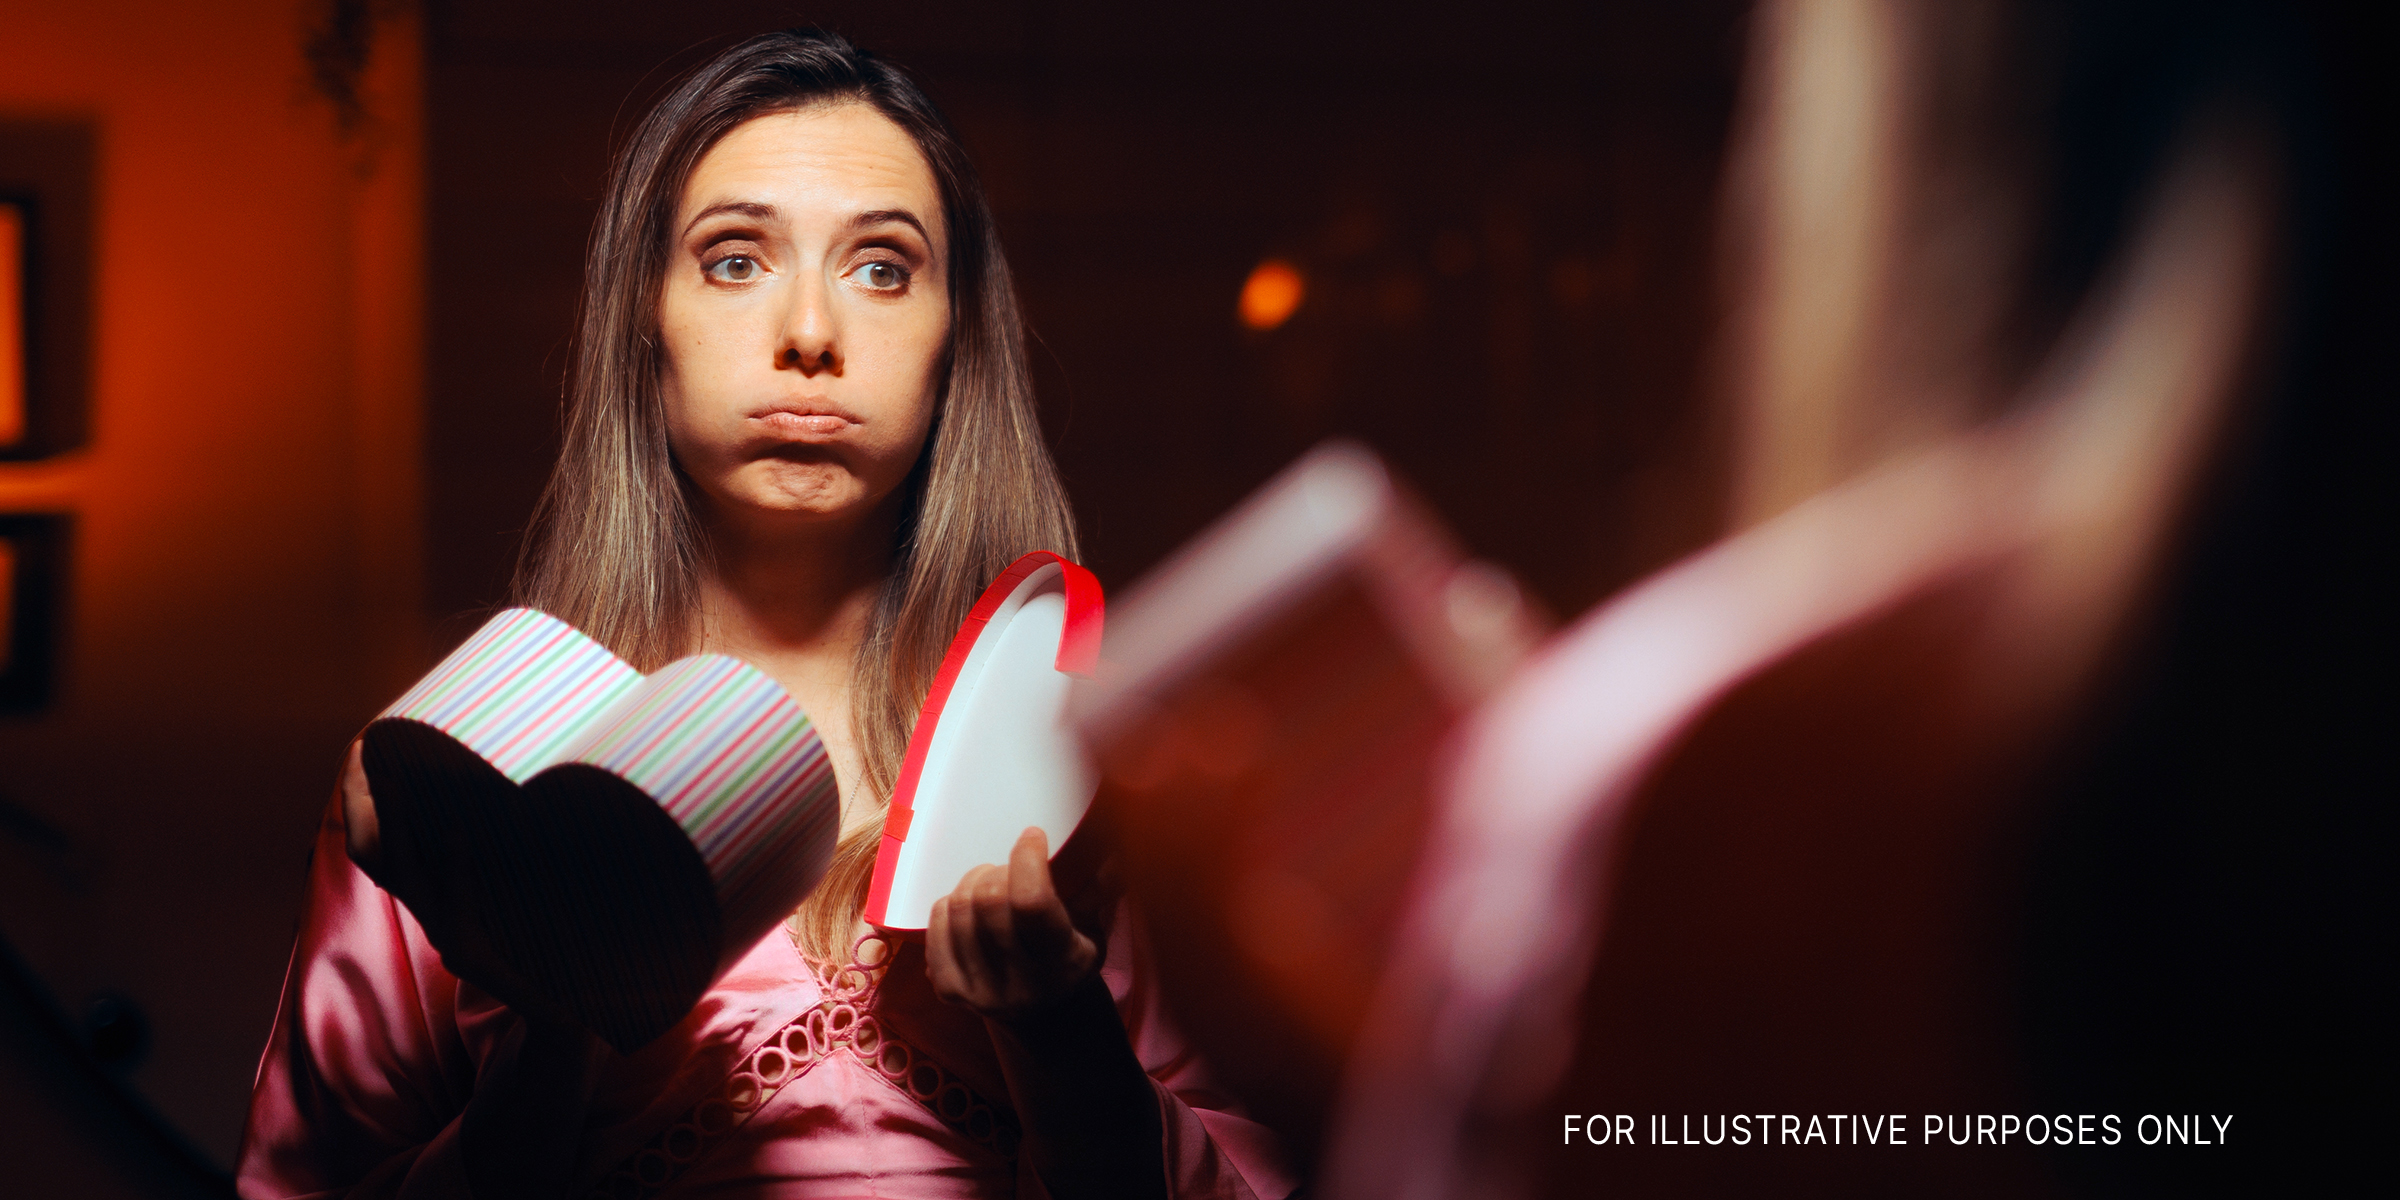 Woman unimpressed with her Valentine's Day gift | Source: Getty Images